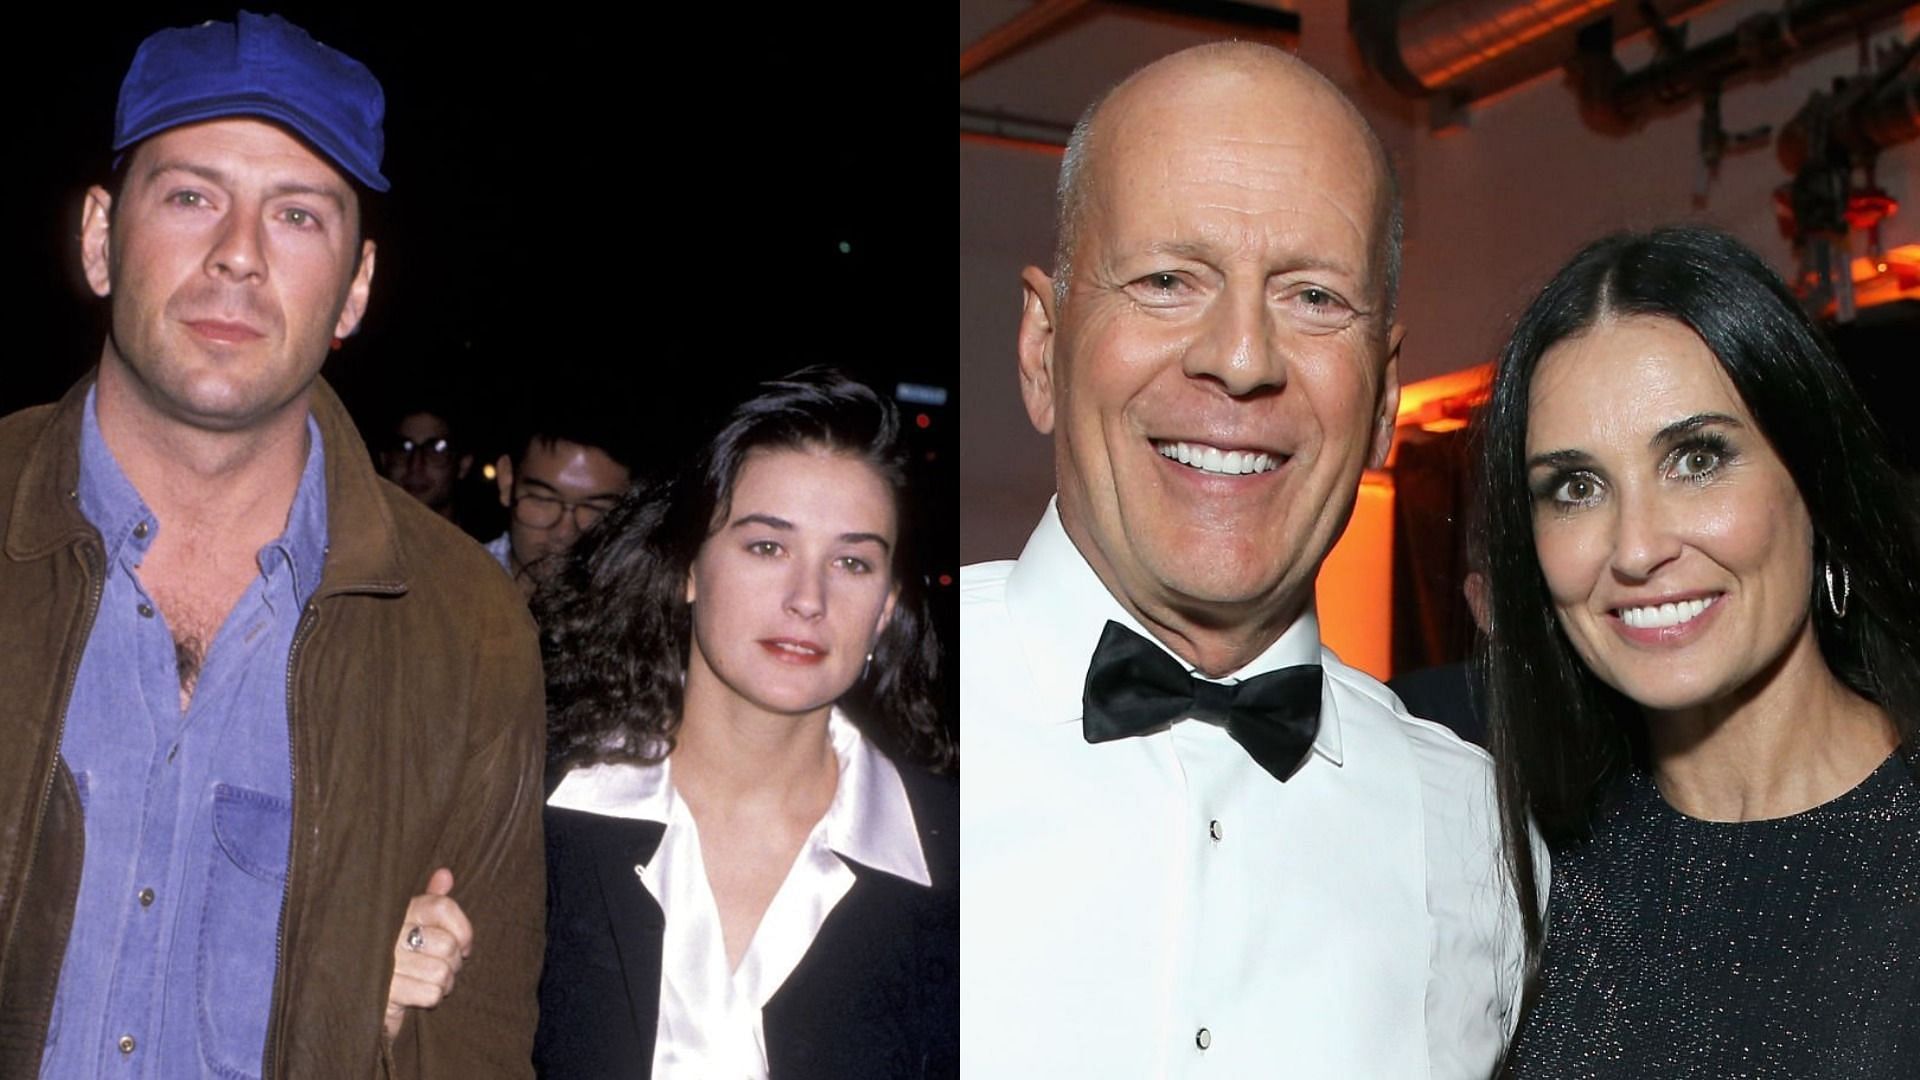 Demi Moore wished her former husband Bruce Willis for his 67th birthday (Image via Jim Smeal/Getty Images and Phil Faraone/Getty Images)